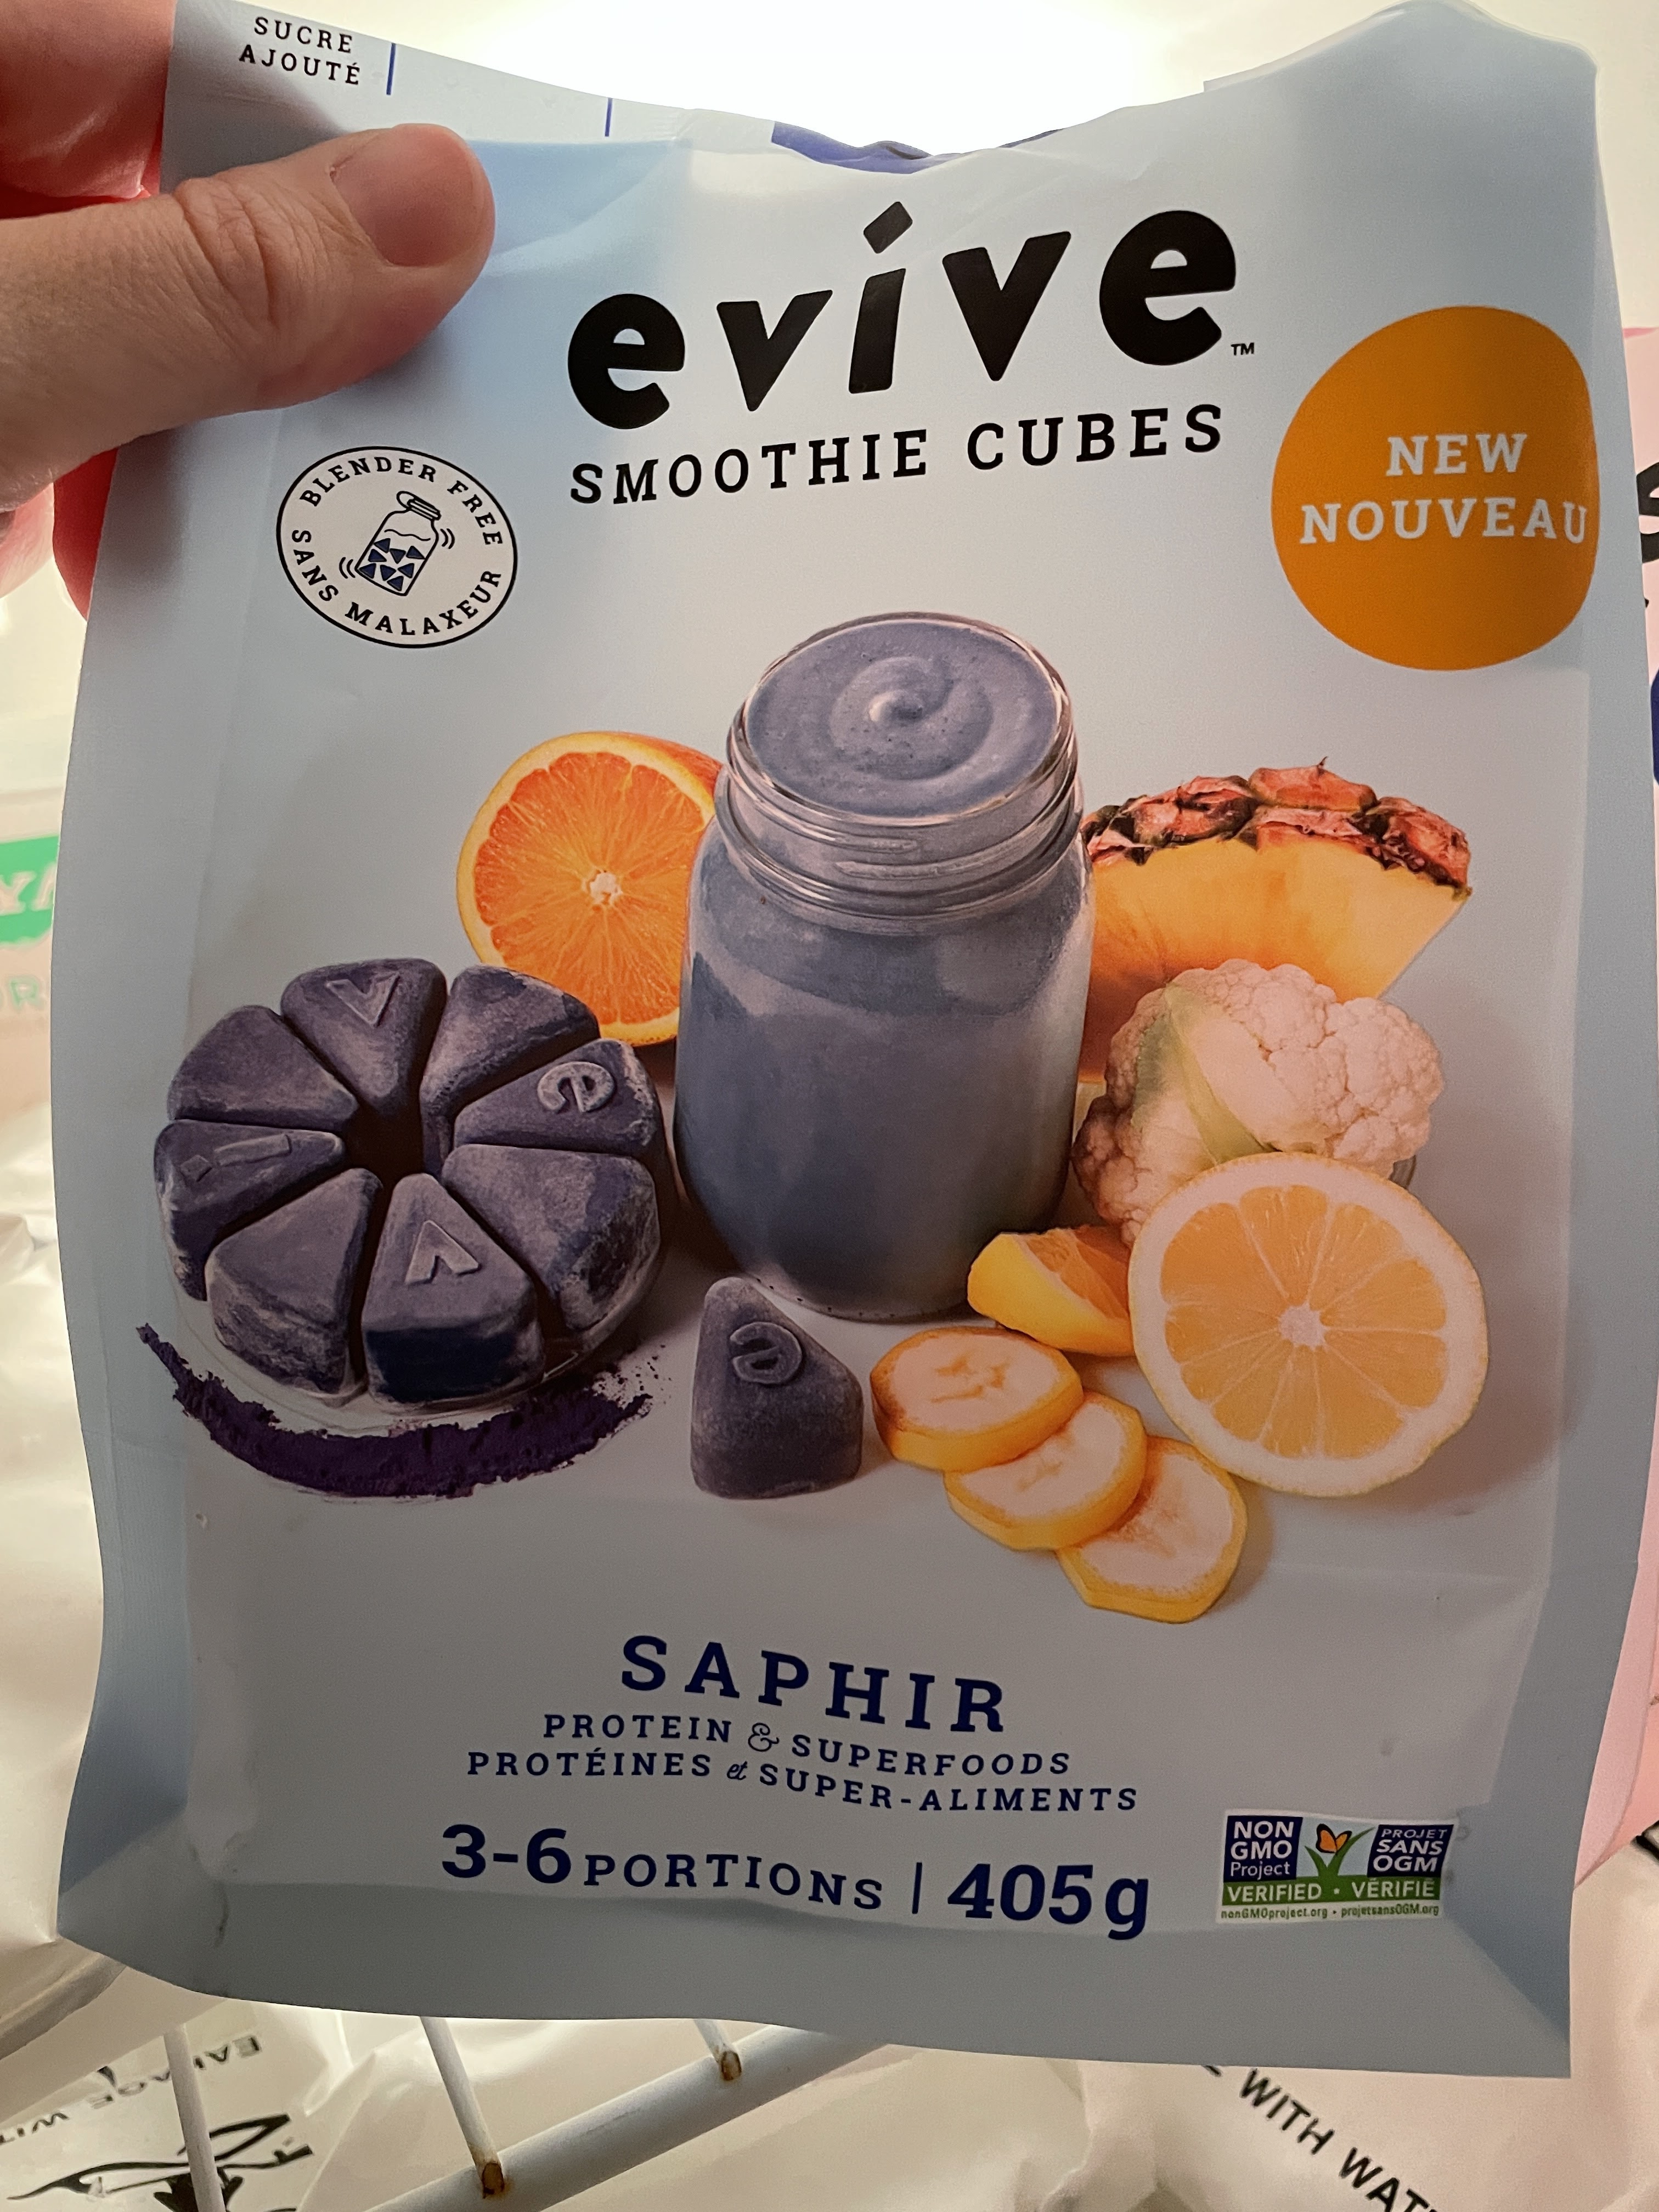 Evive Smoothie Cubes Review: Worth the Price?